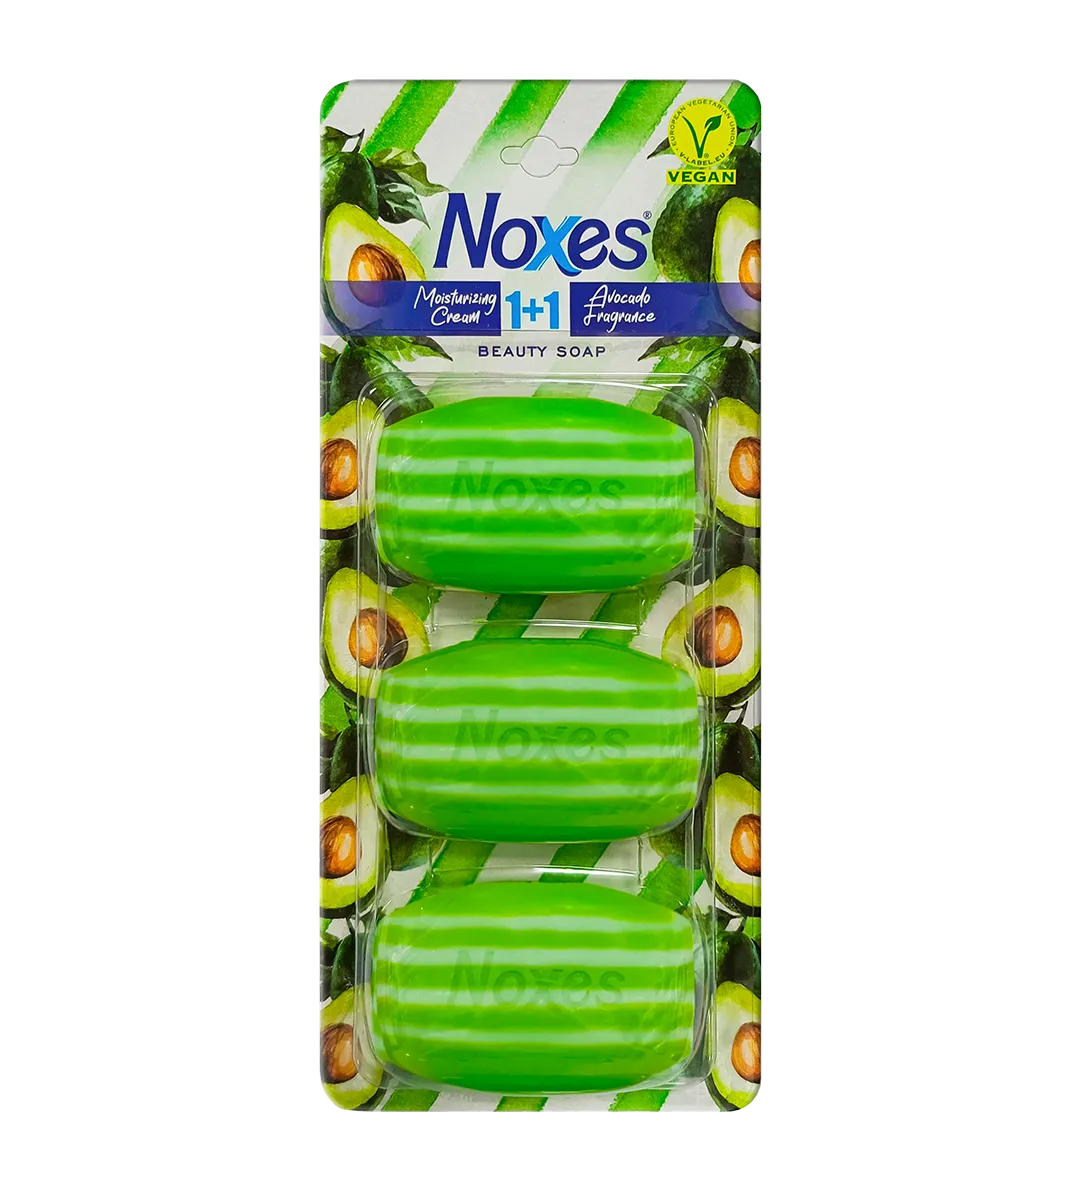 NOXES SOAP BLISTER DUO SERIES AVOCADO BEAUTY SOAP